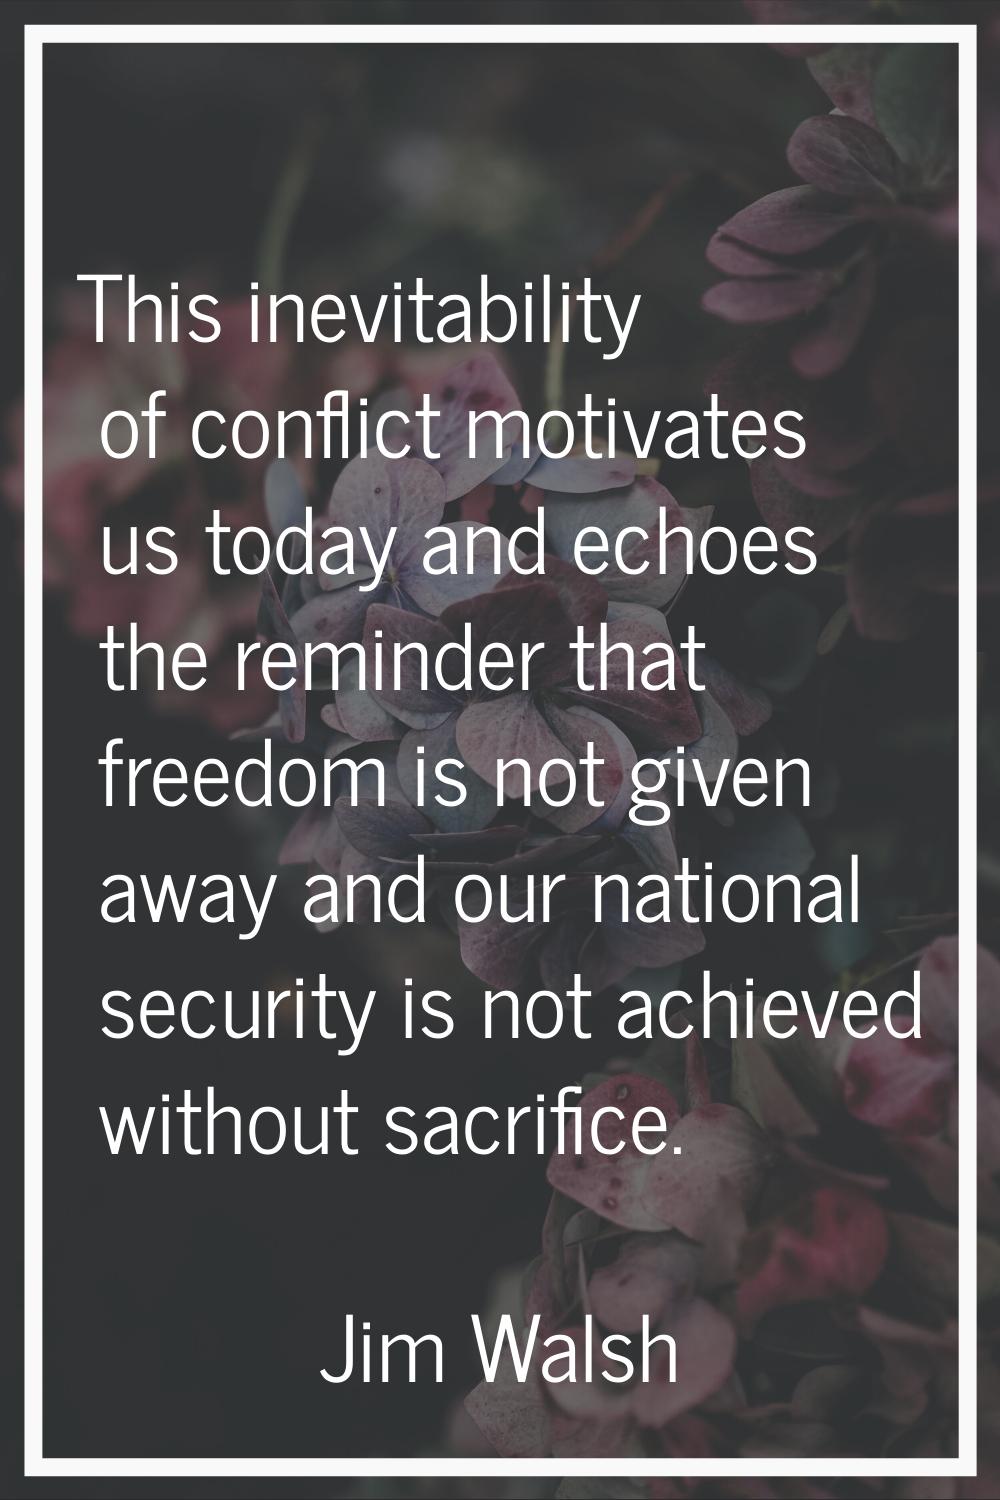 This inevitability of conflict motivates us today and echoes the reminder that freedom is not given